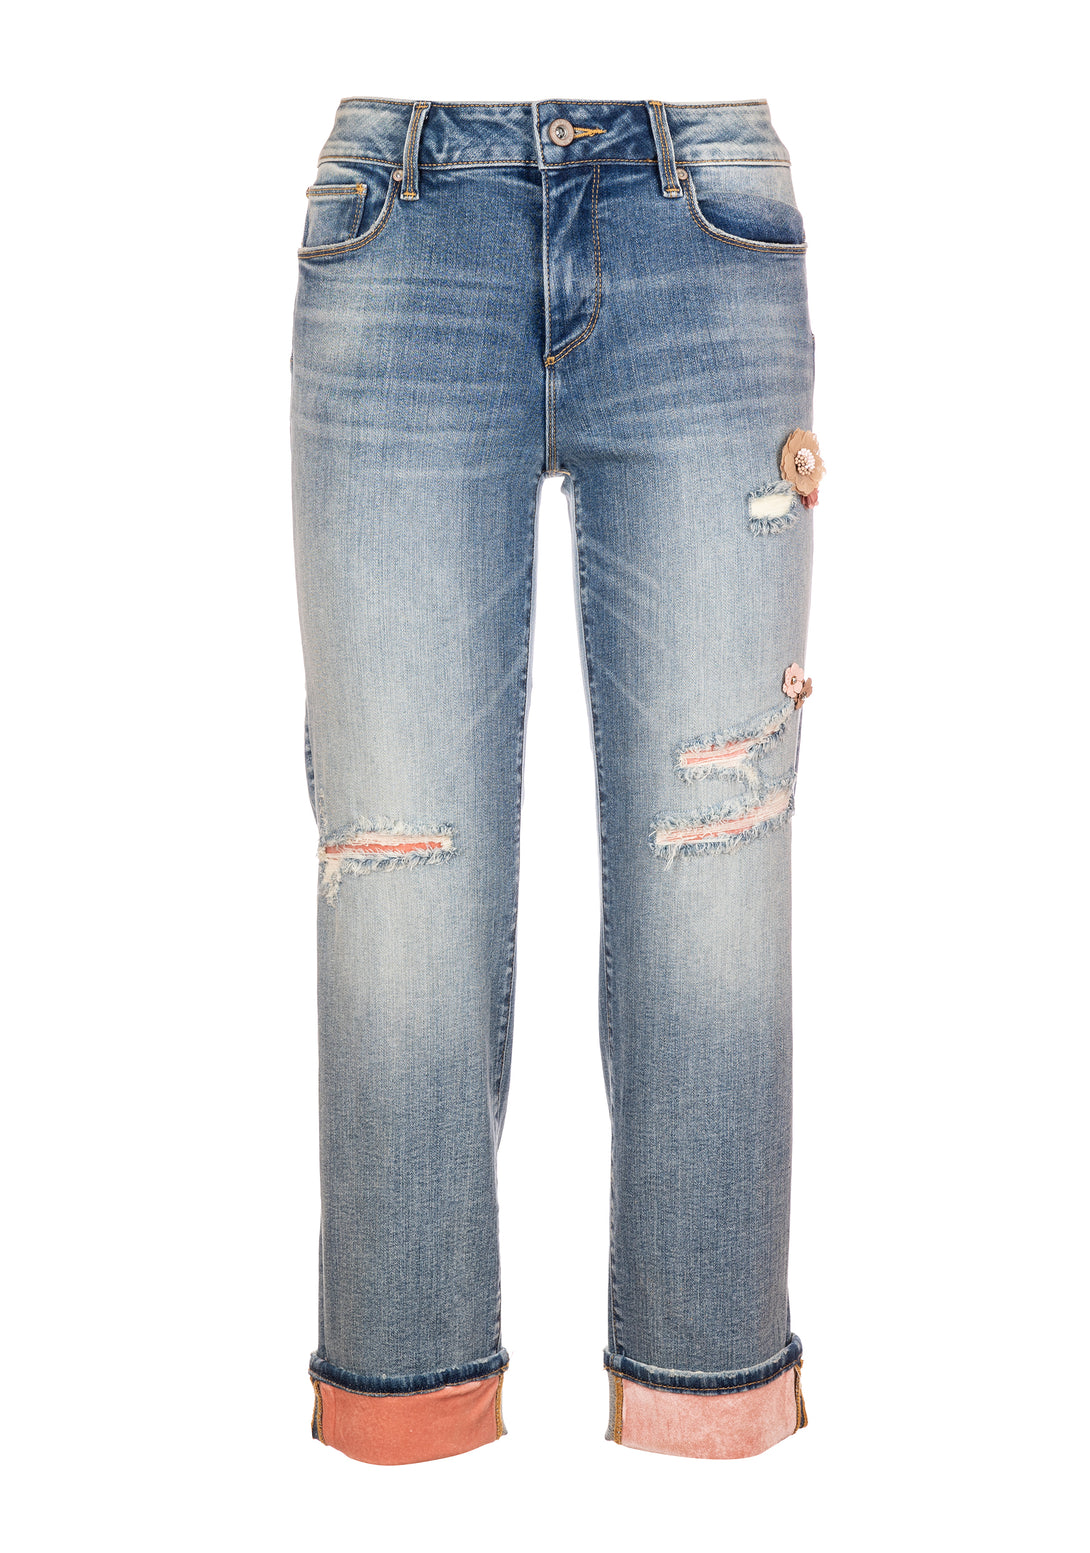 Jeans cropped with push up effect made in denim with light wash